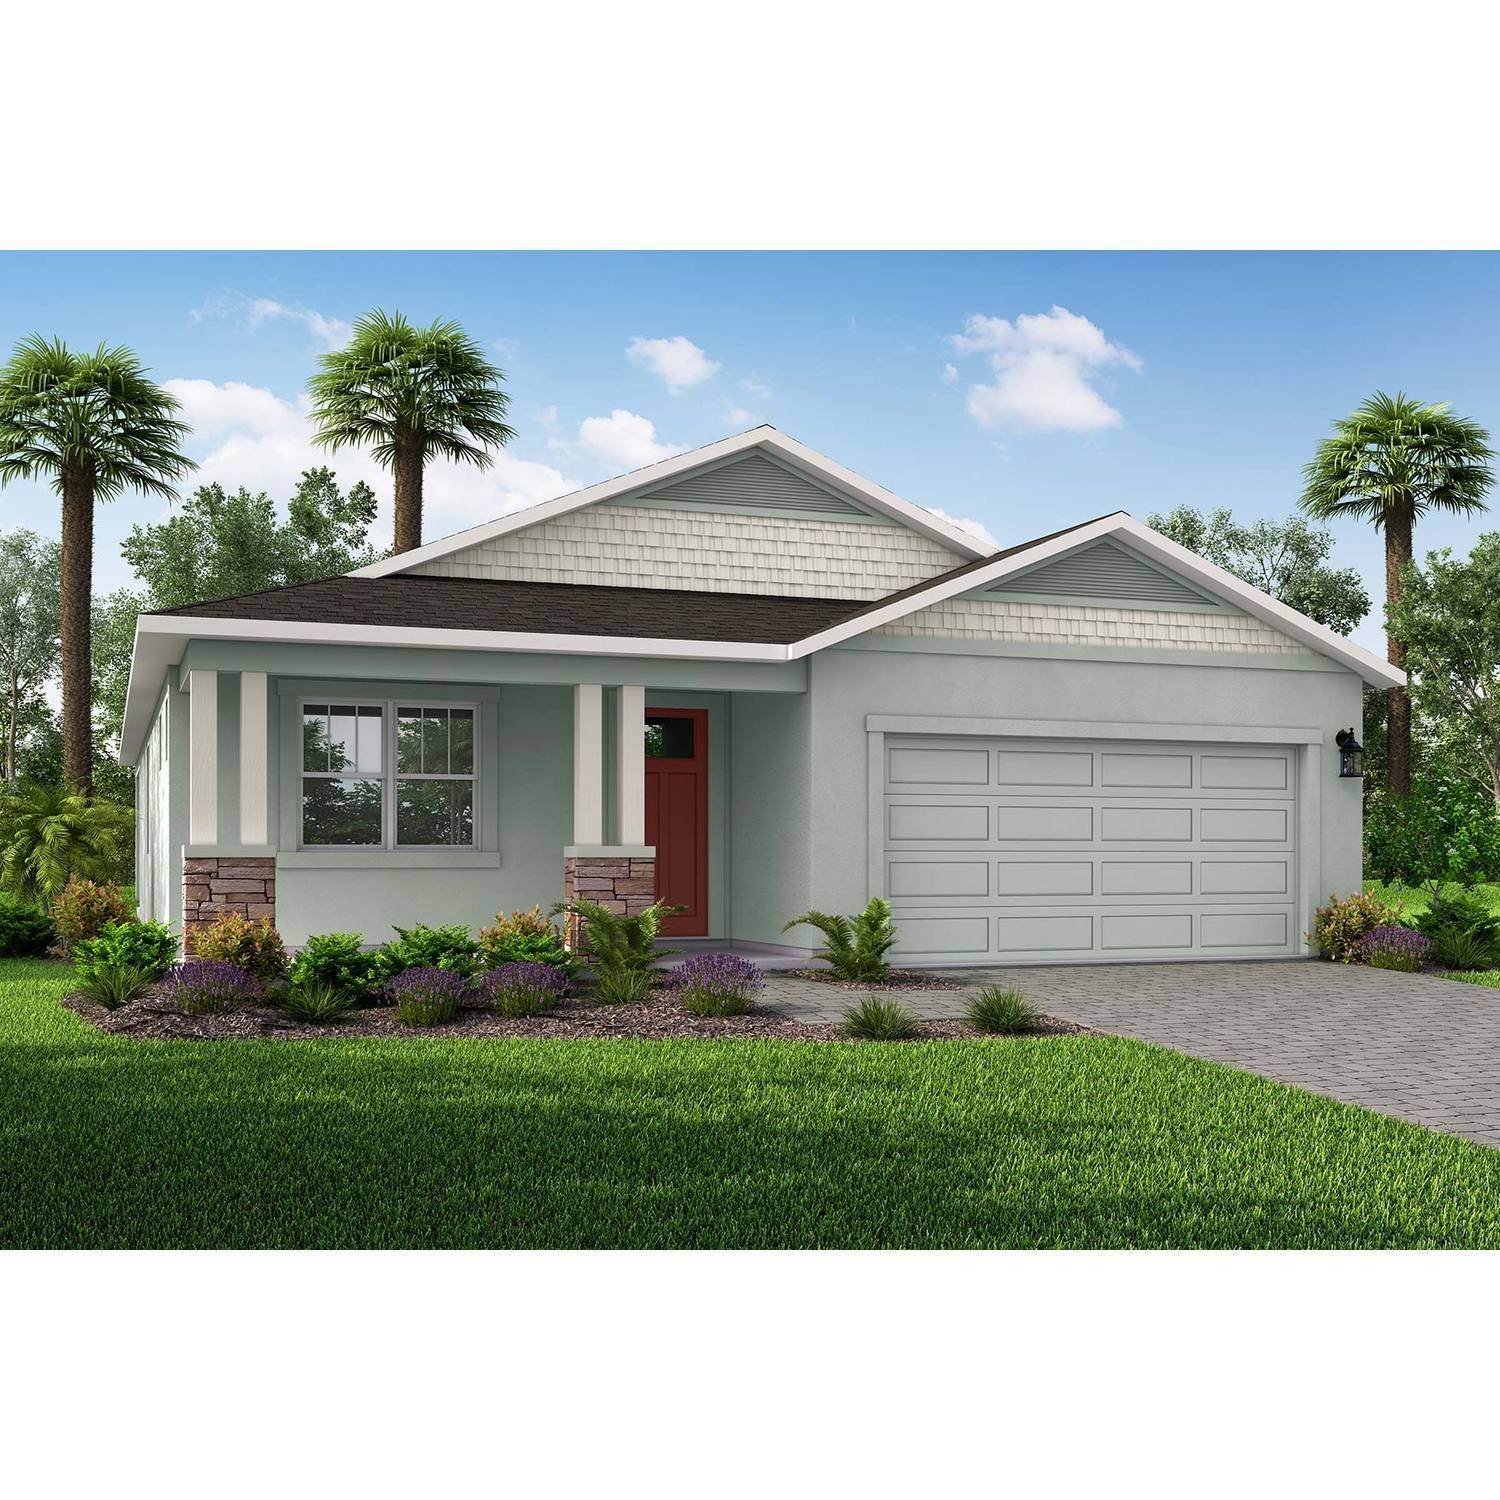 Single Family for Sale at Parkview At Long Lake Ranch 19222 Blue Pond Drive, Lutz, FL 33558